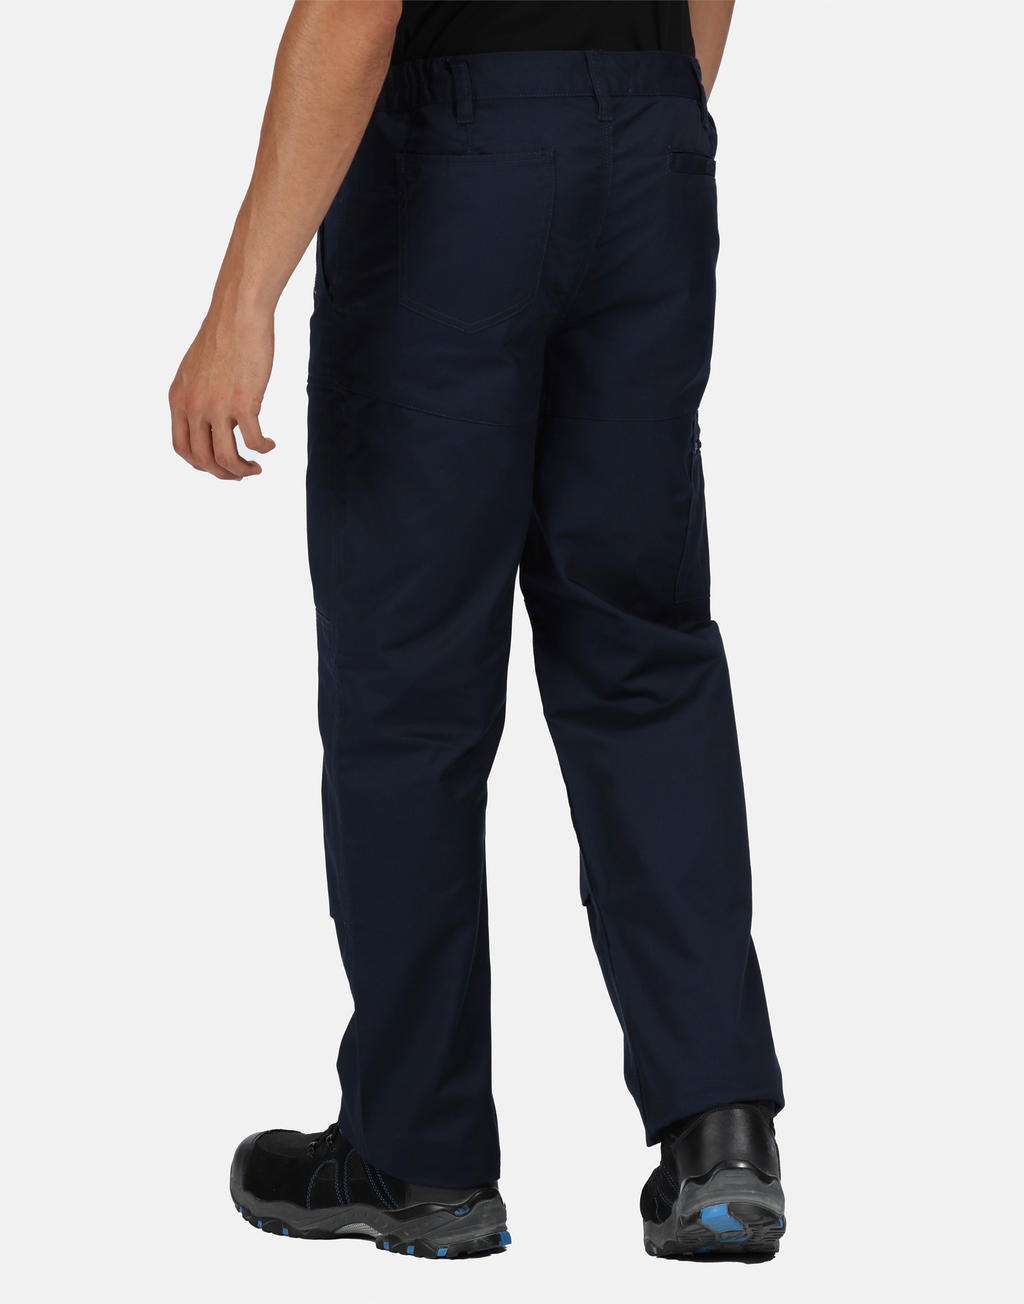  Pro Action Trousers (Short) in Farbe Black